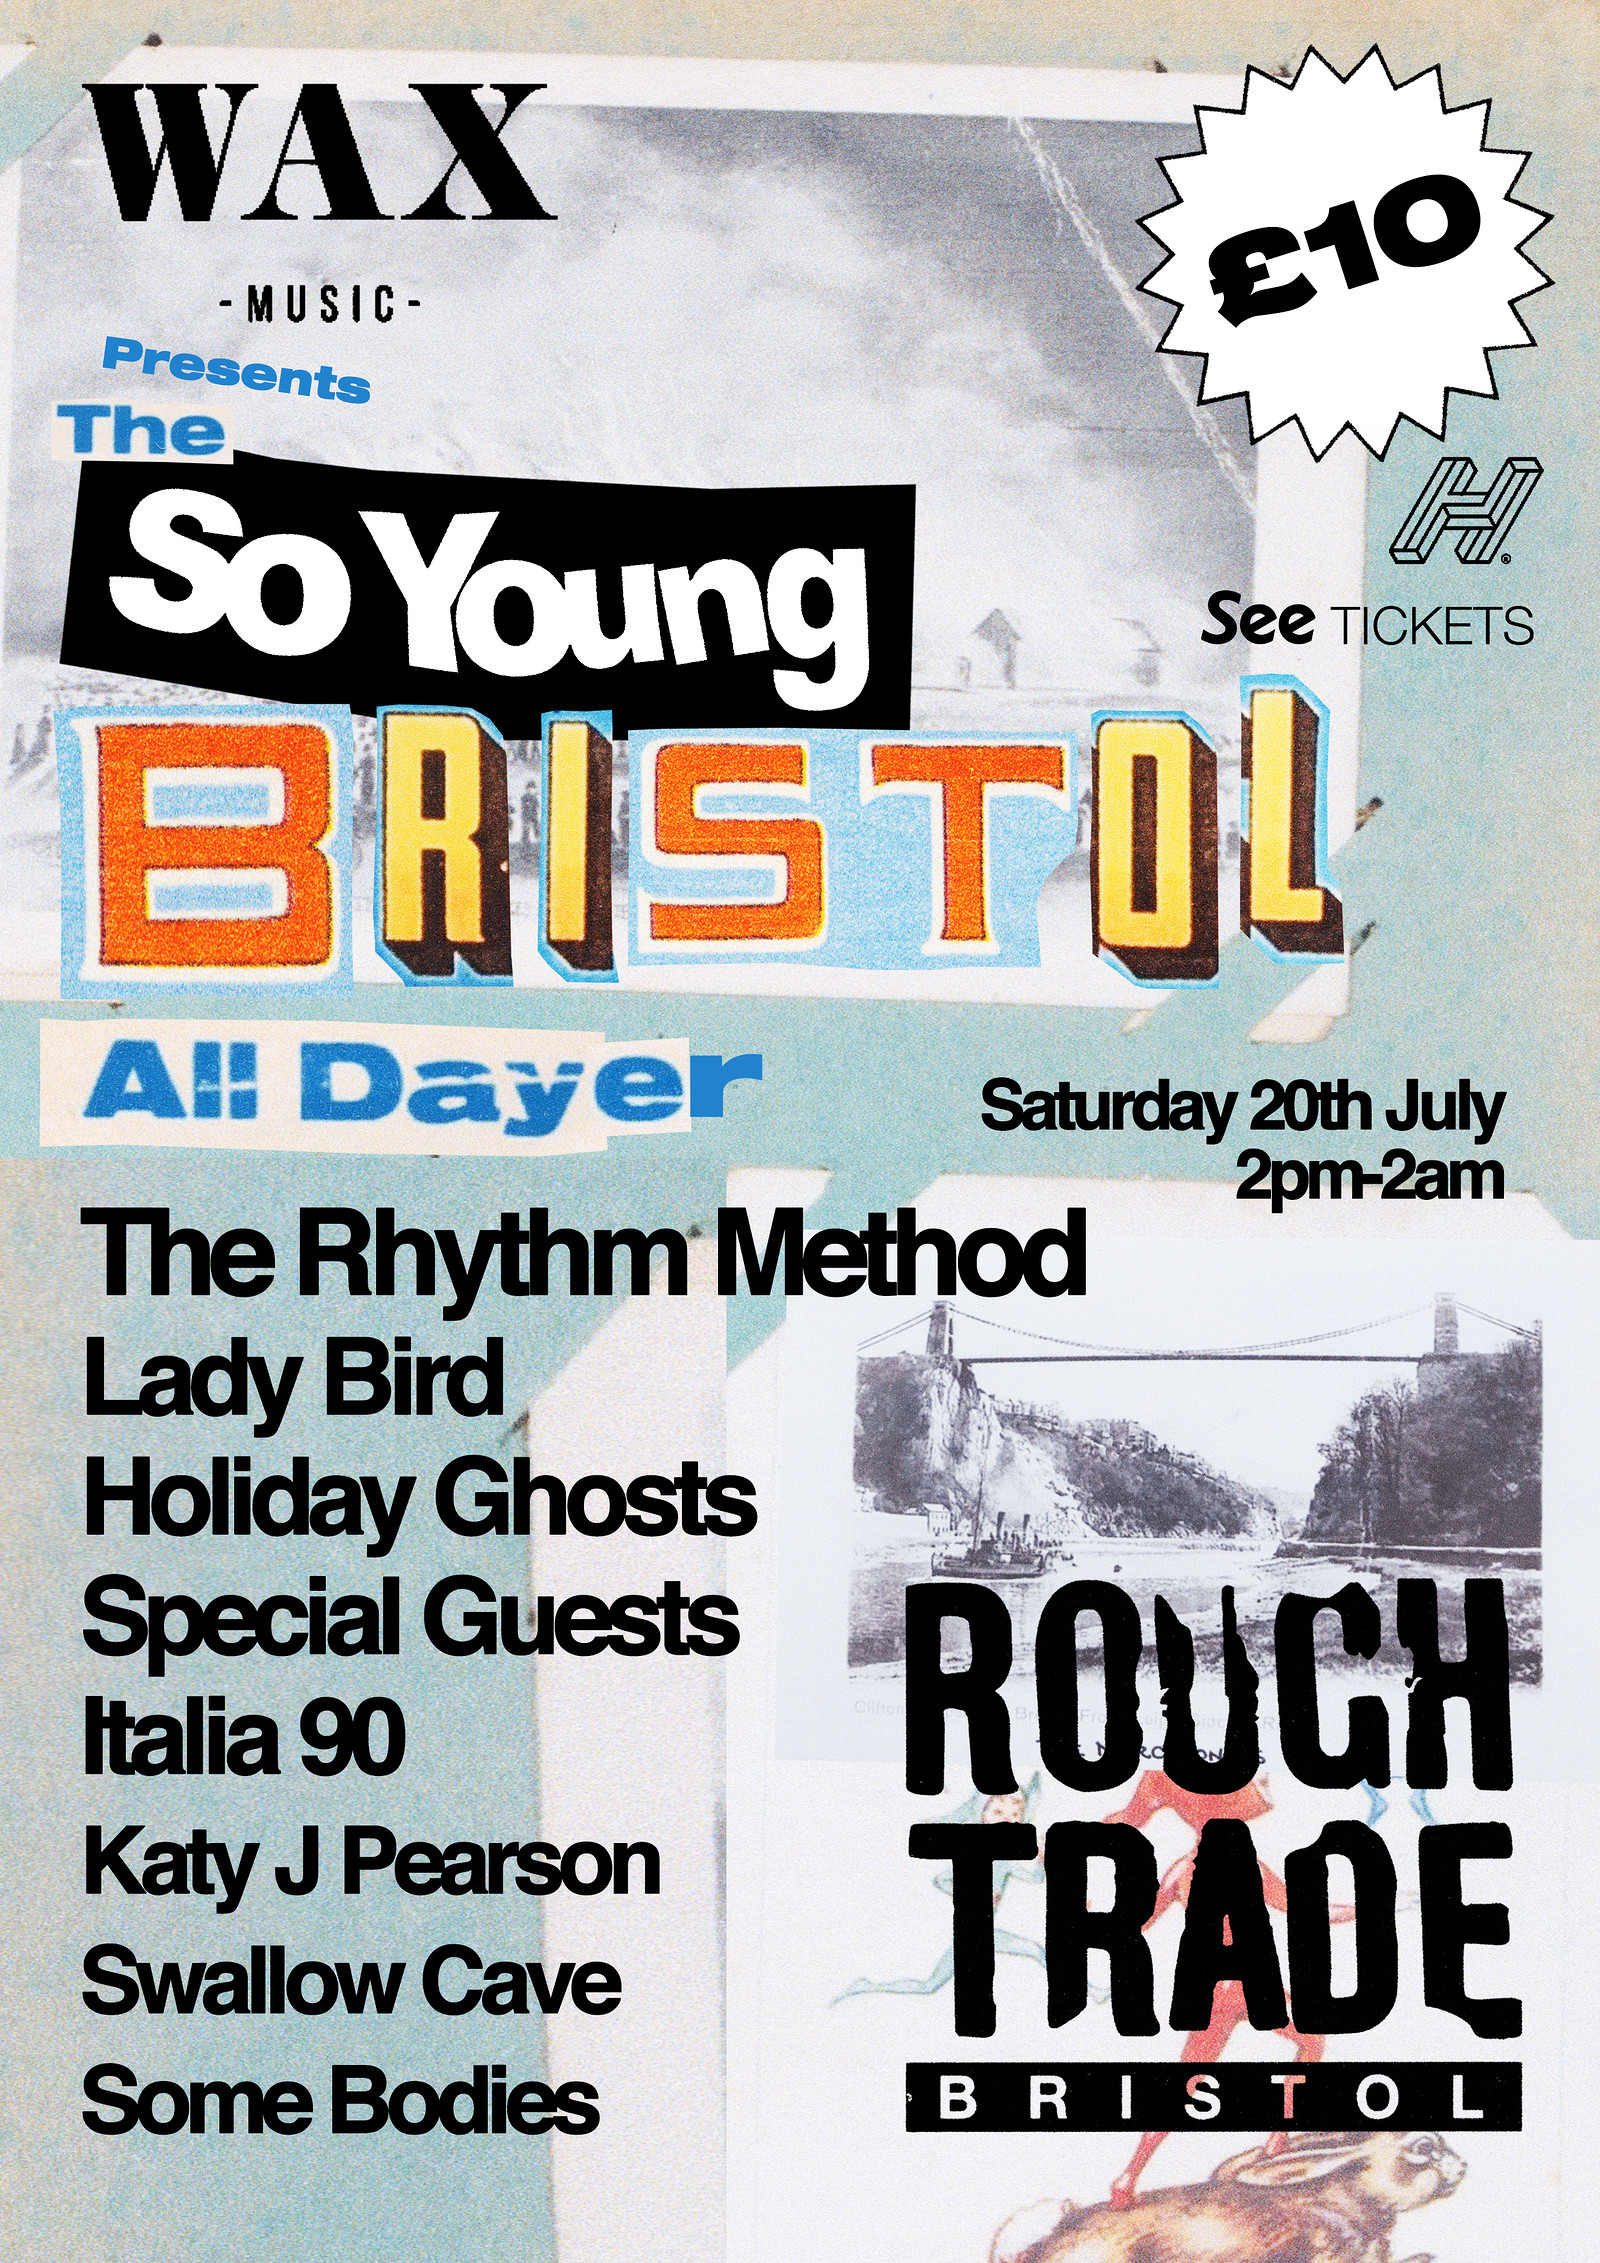 The So Young Bristol All-Dayer at Rough Trade Bristol